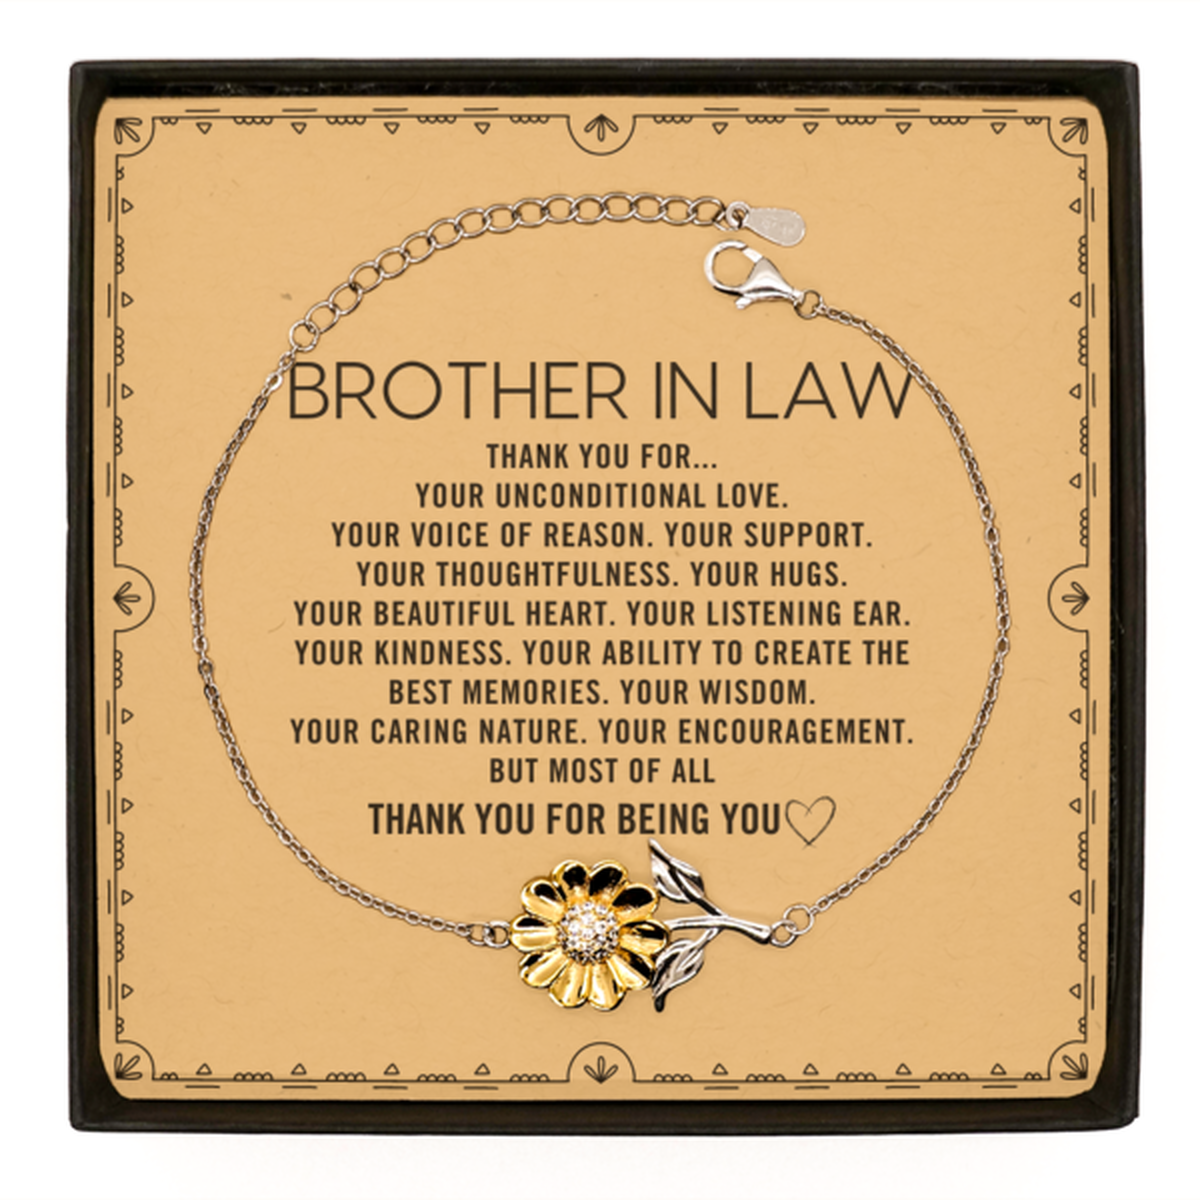 Brother In Law Sunflower Bracelet Custom, Message Card Gifts For Brother In Law Christmas Graduation Birthday Gifts for Men Women Brother In Law Thank you for Your unconditional love